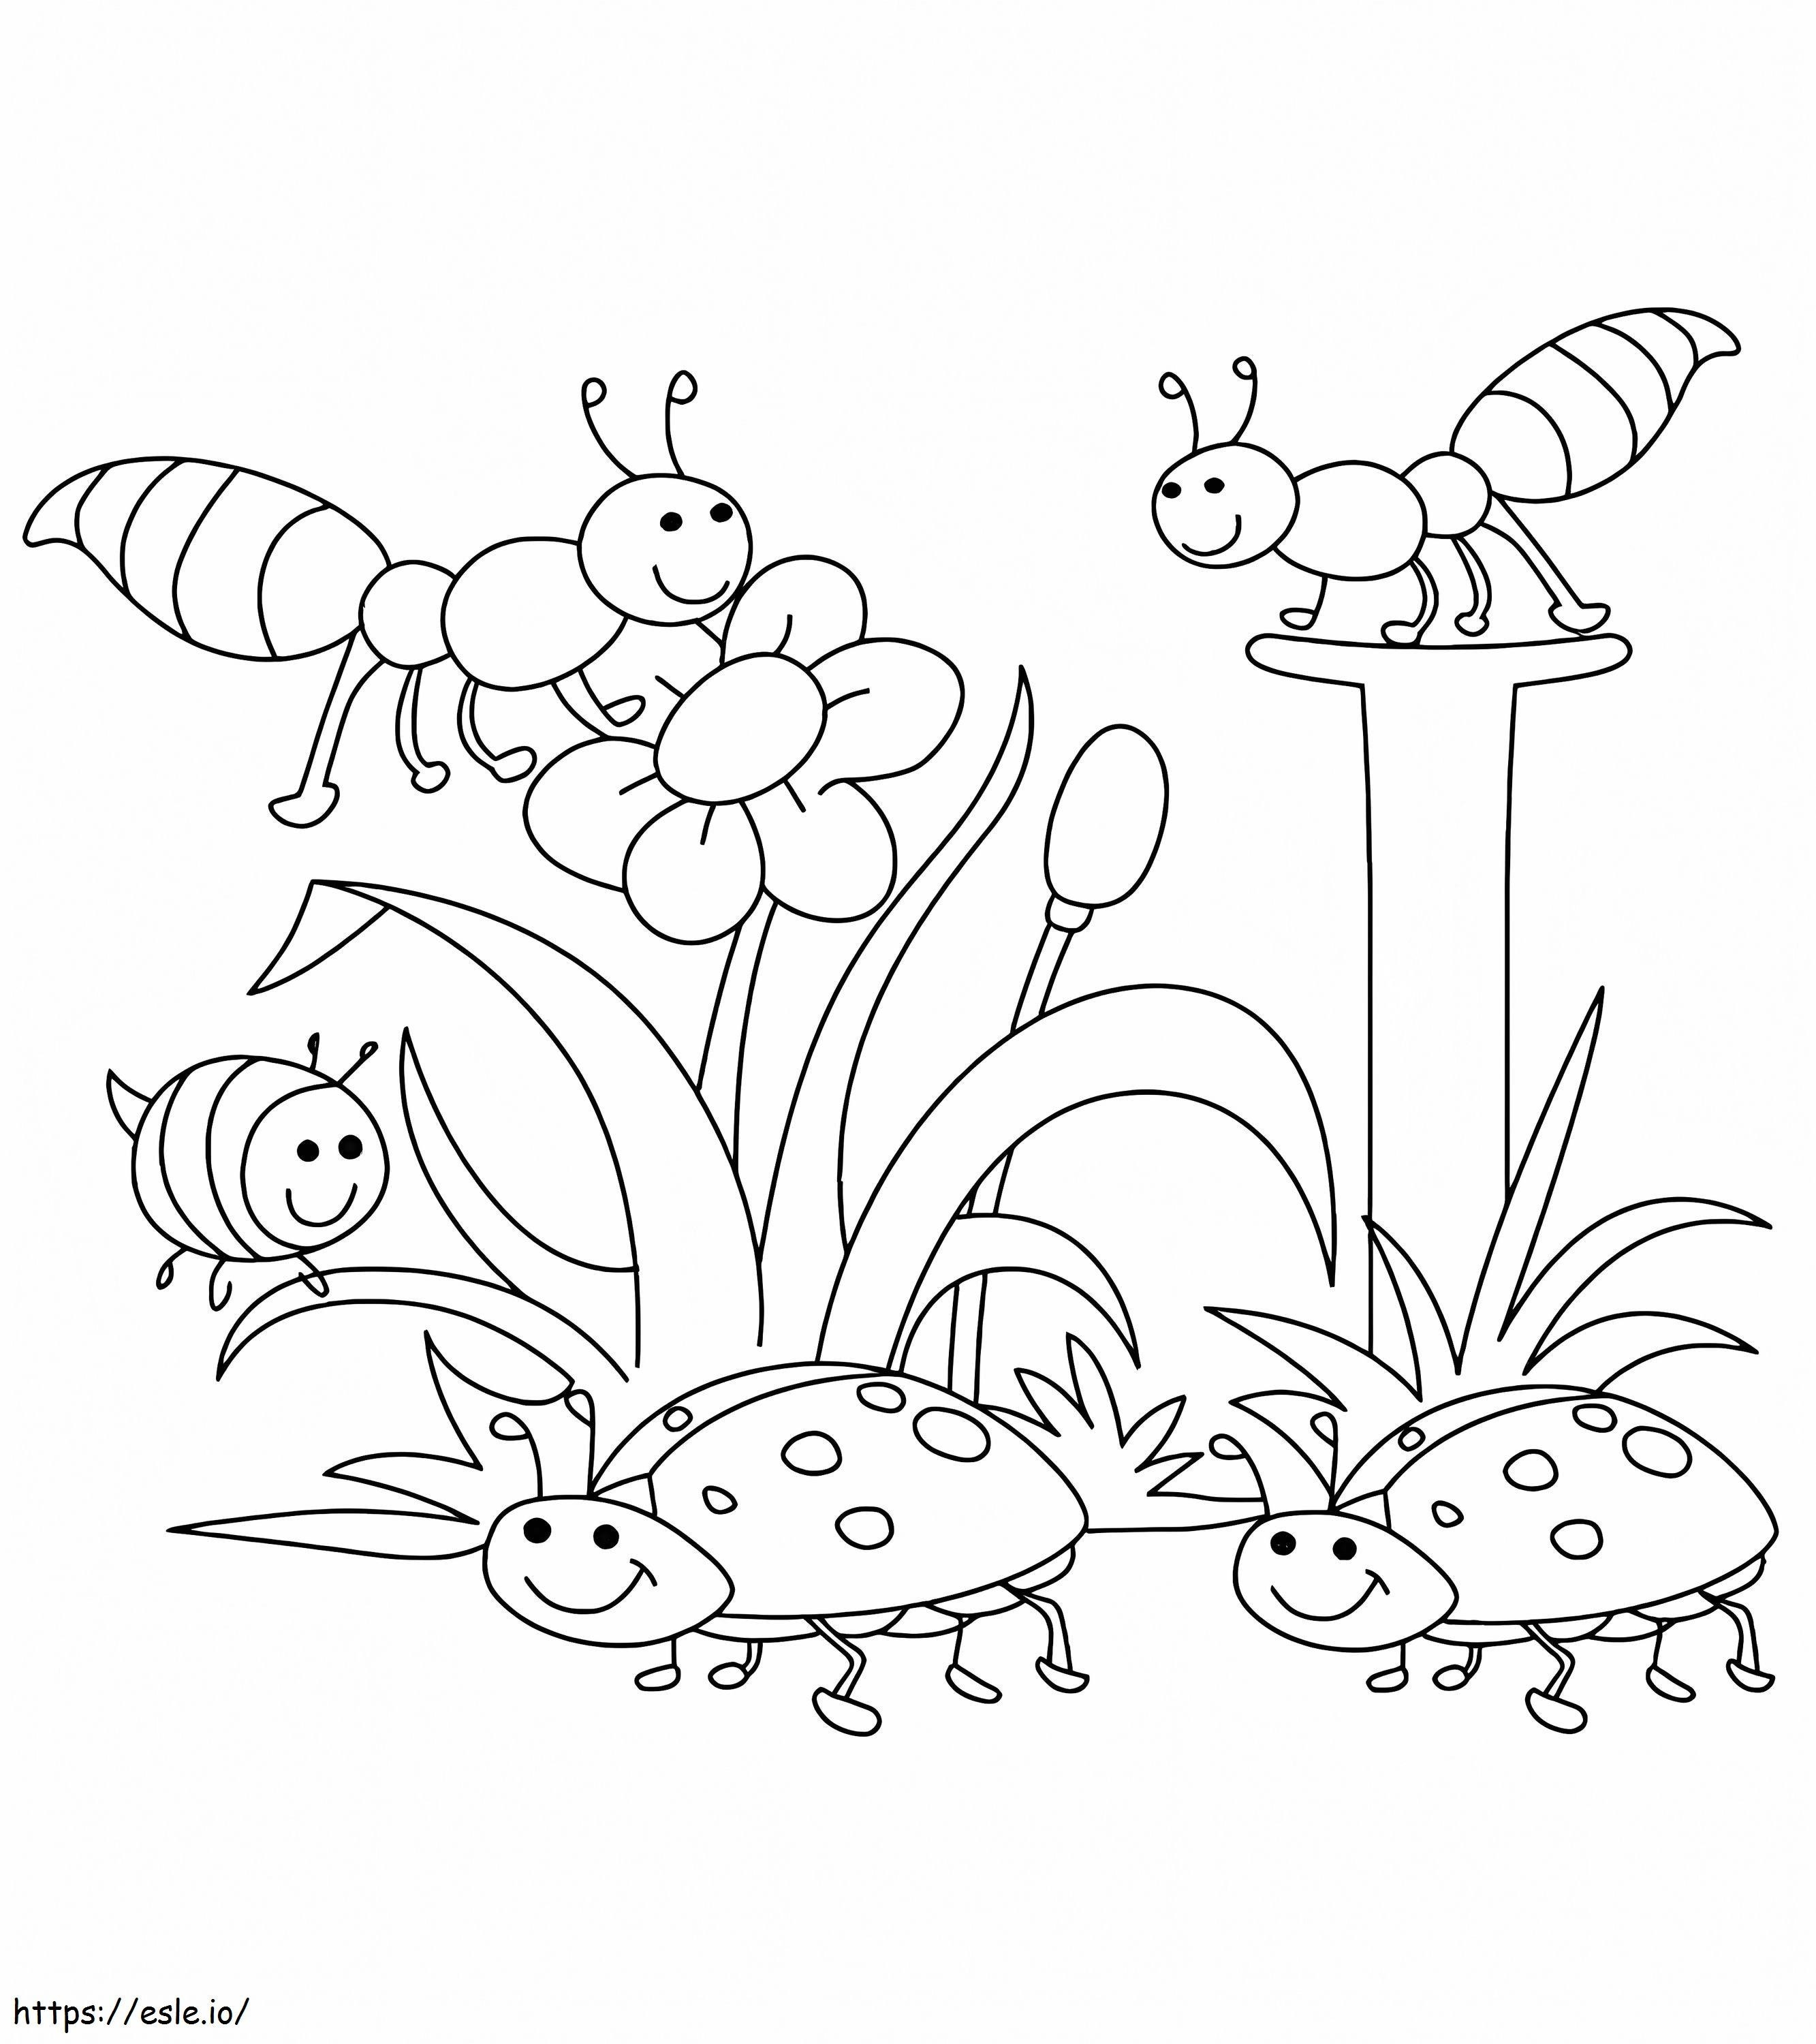 Insects In Spring coloring page